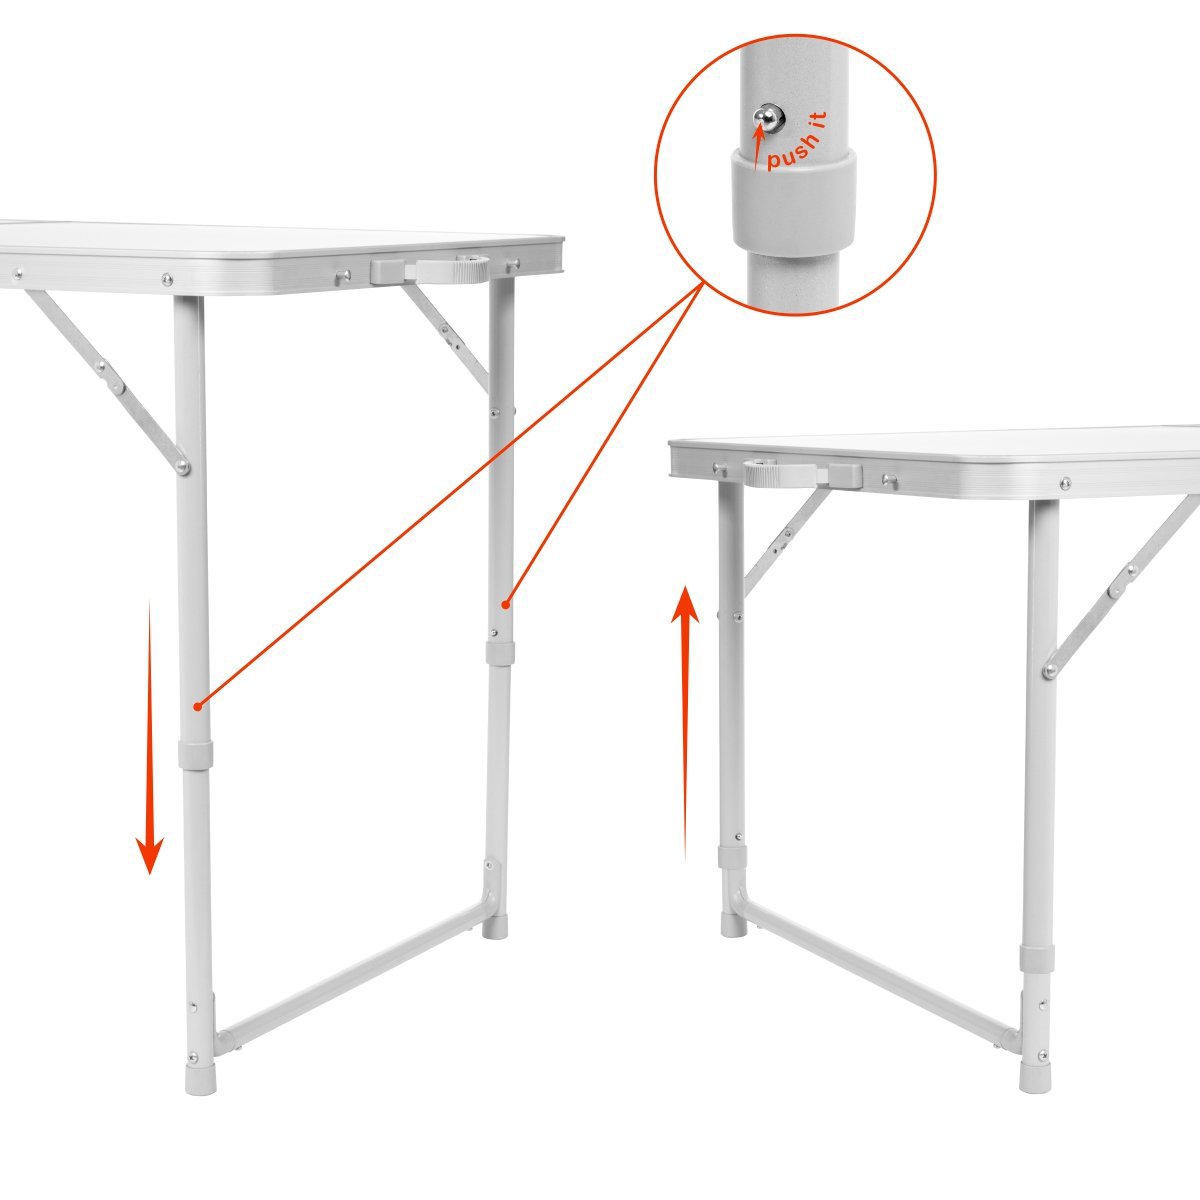 The table features adjustable legs, folding in one click